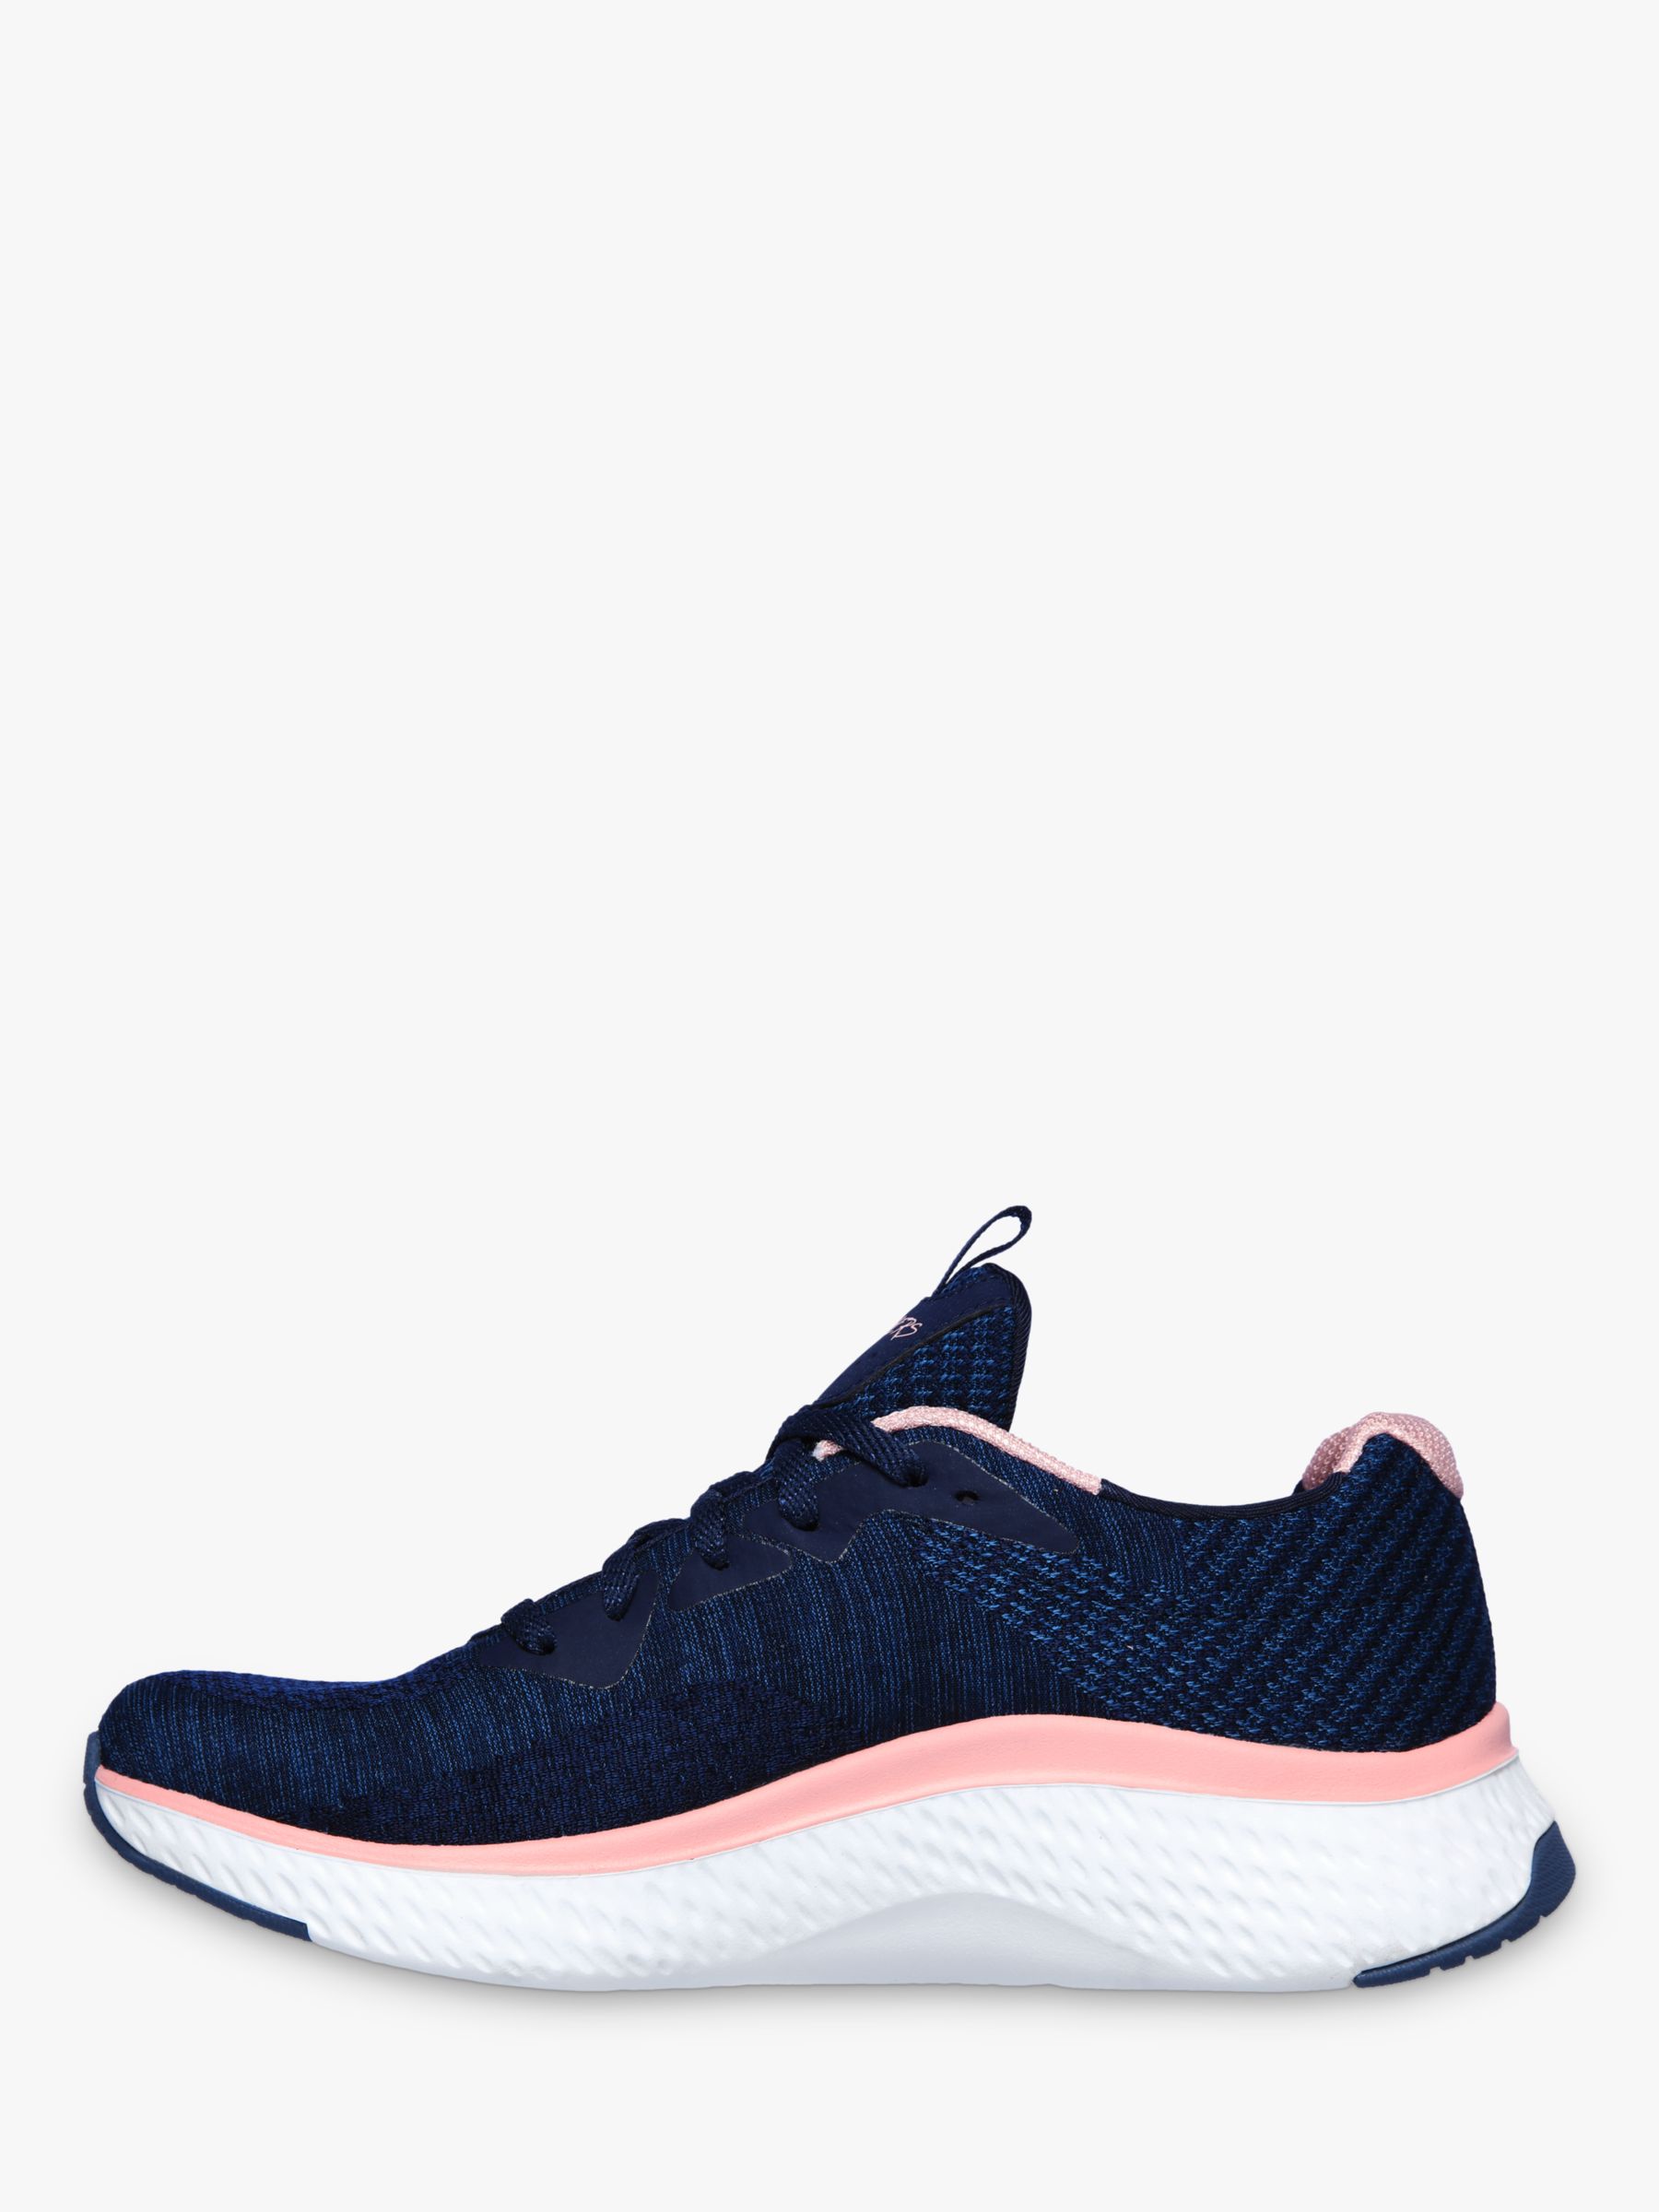 skechers navy and pink trainers